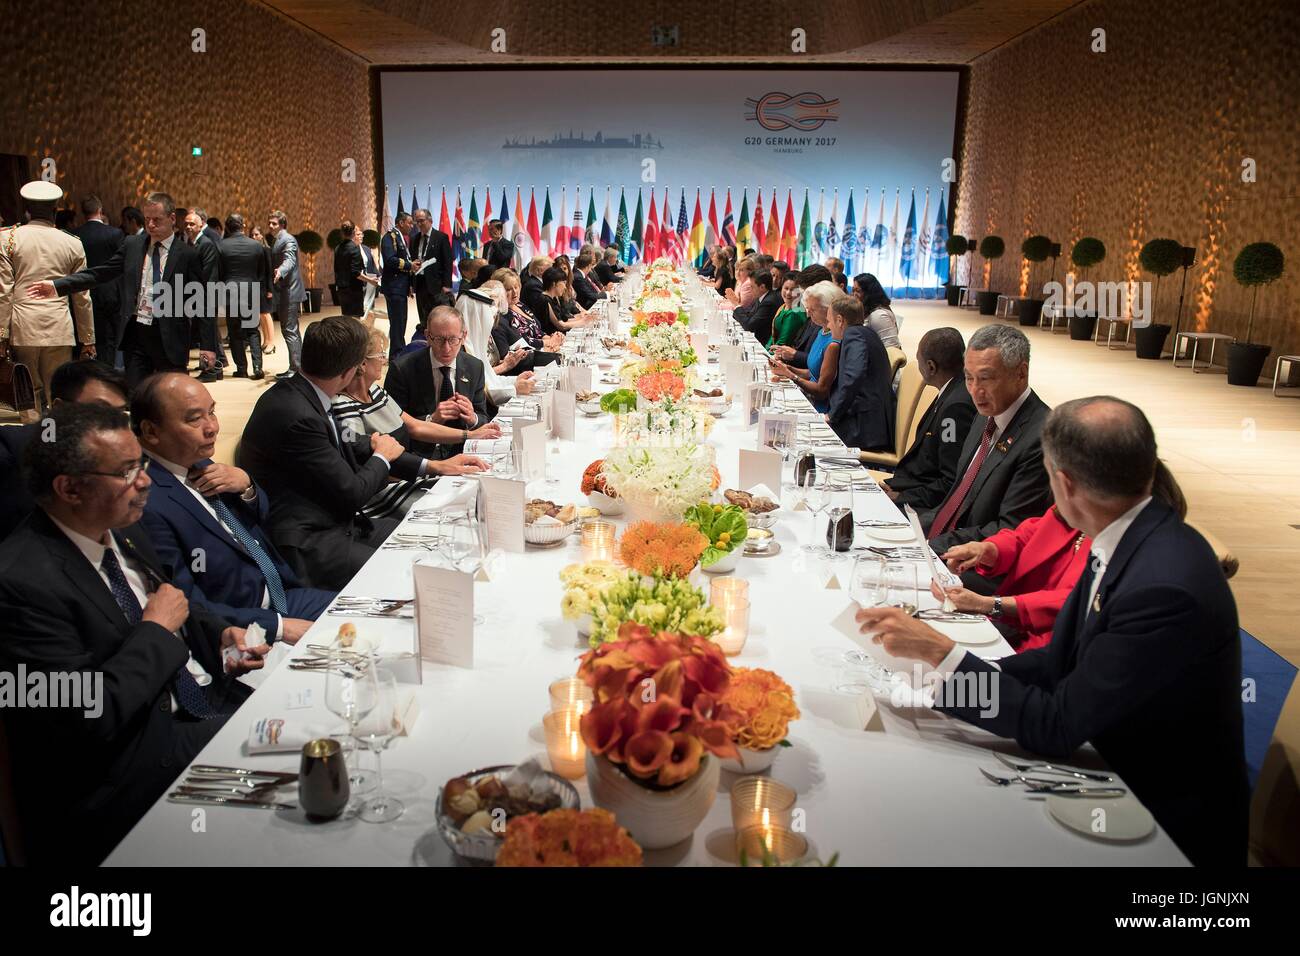 German Chancellor Angela Merkel hosts a dinner for world leaders attending the first day of the G20 Summit meeting at the Elbphilharmonie concert hall July 7, 2017 in Hamburg, Germany.   (Bundesregierung/Bergmann via Planetpix) Stock Photo